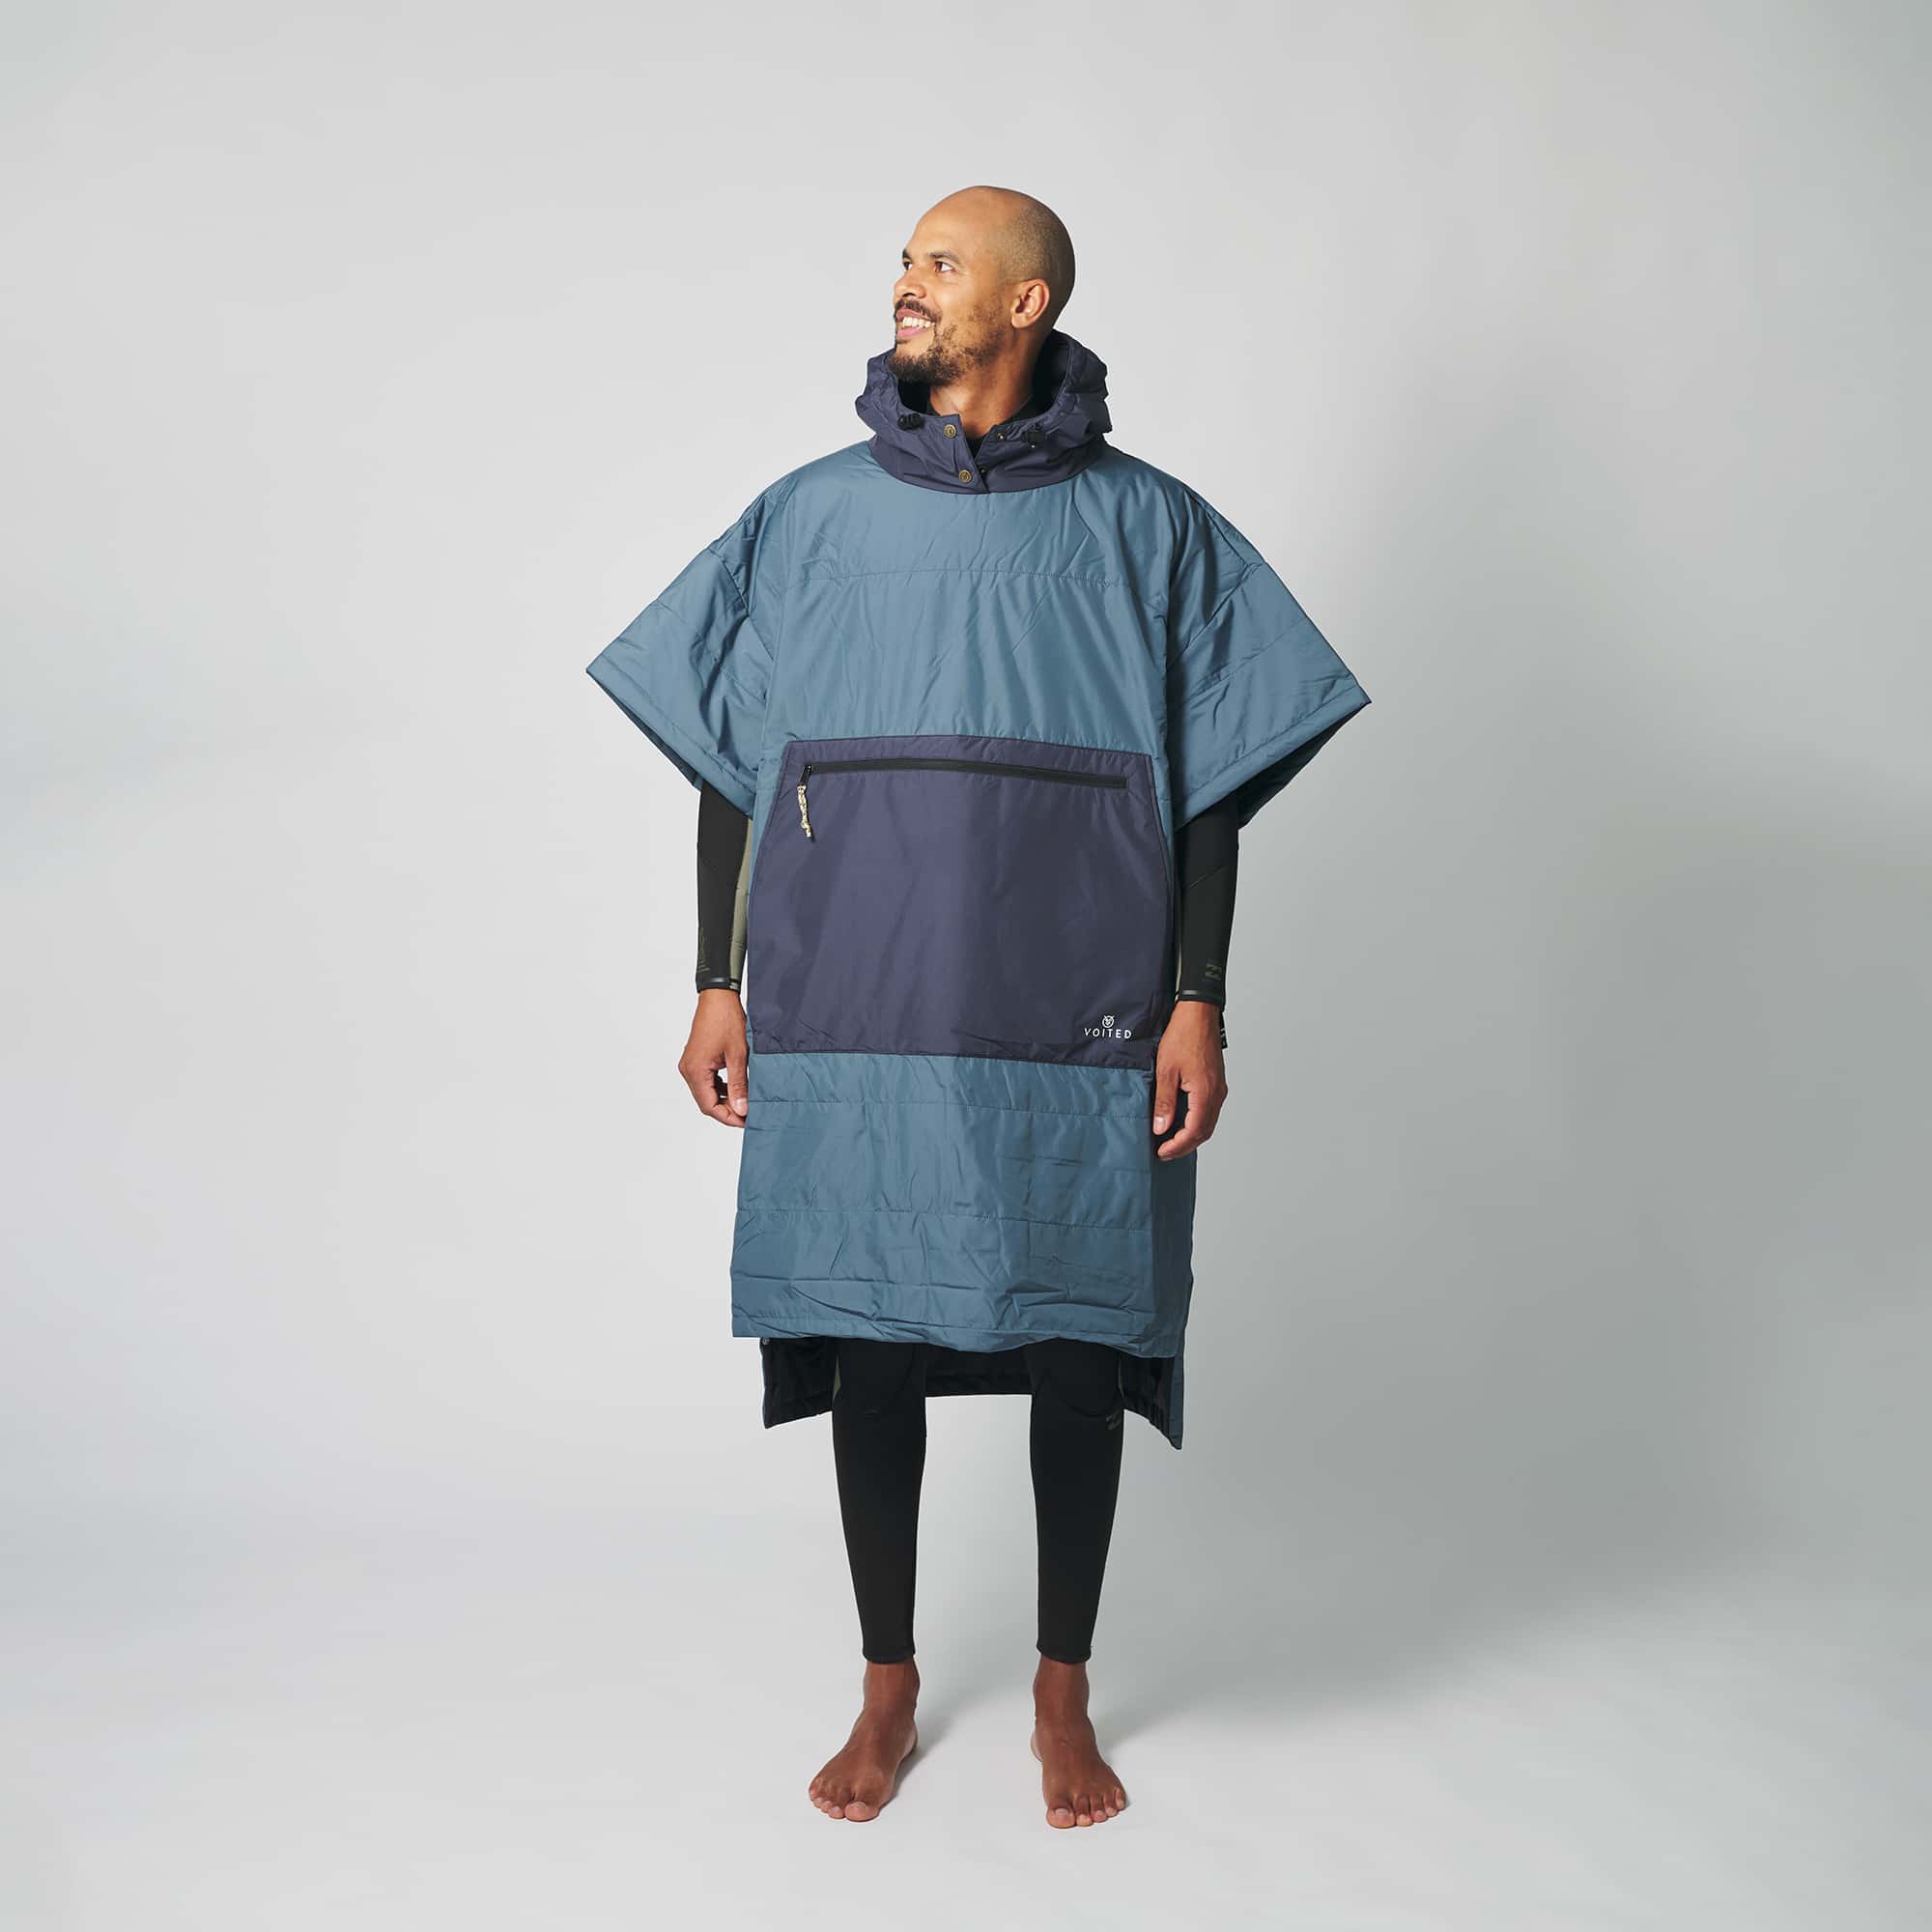 VOITED 2nd Edition Outdoor Poncho for Surfing, Camping, Vanlife